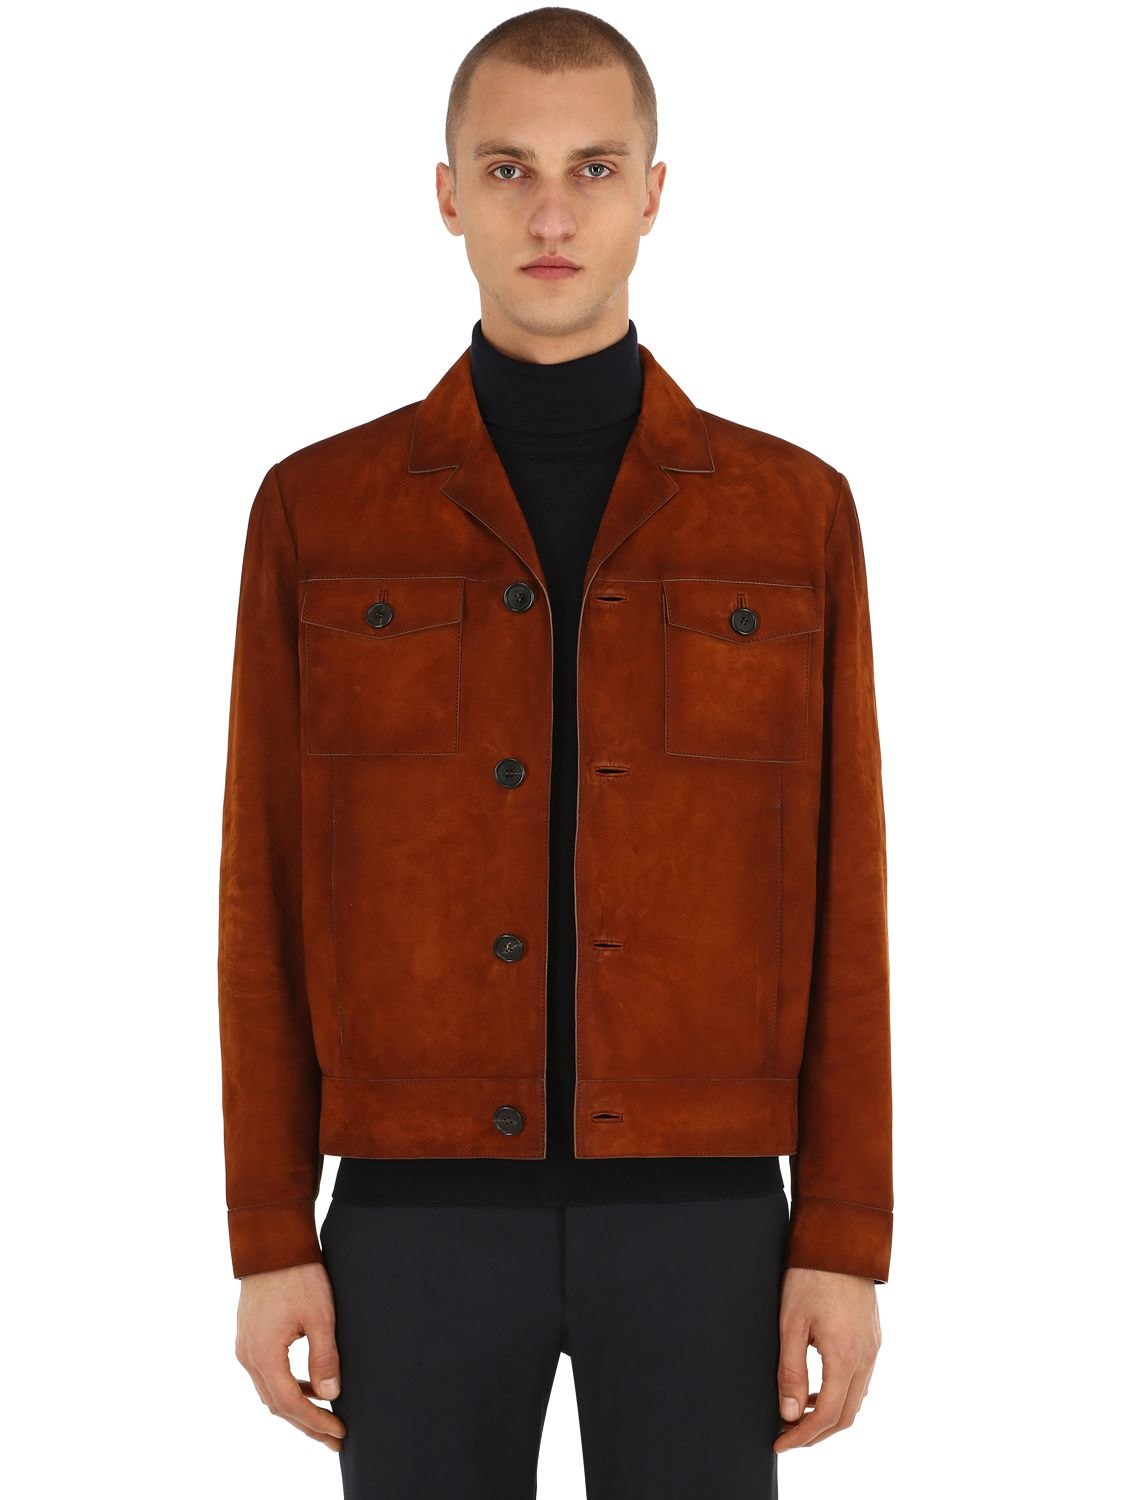 Suede Leather Trucker Jacket | The Fashionisto